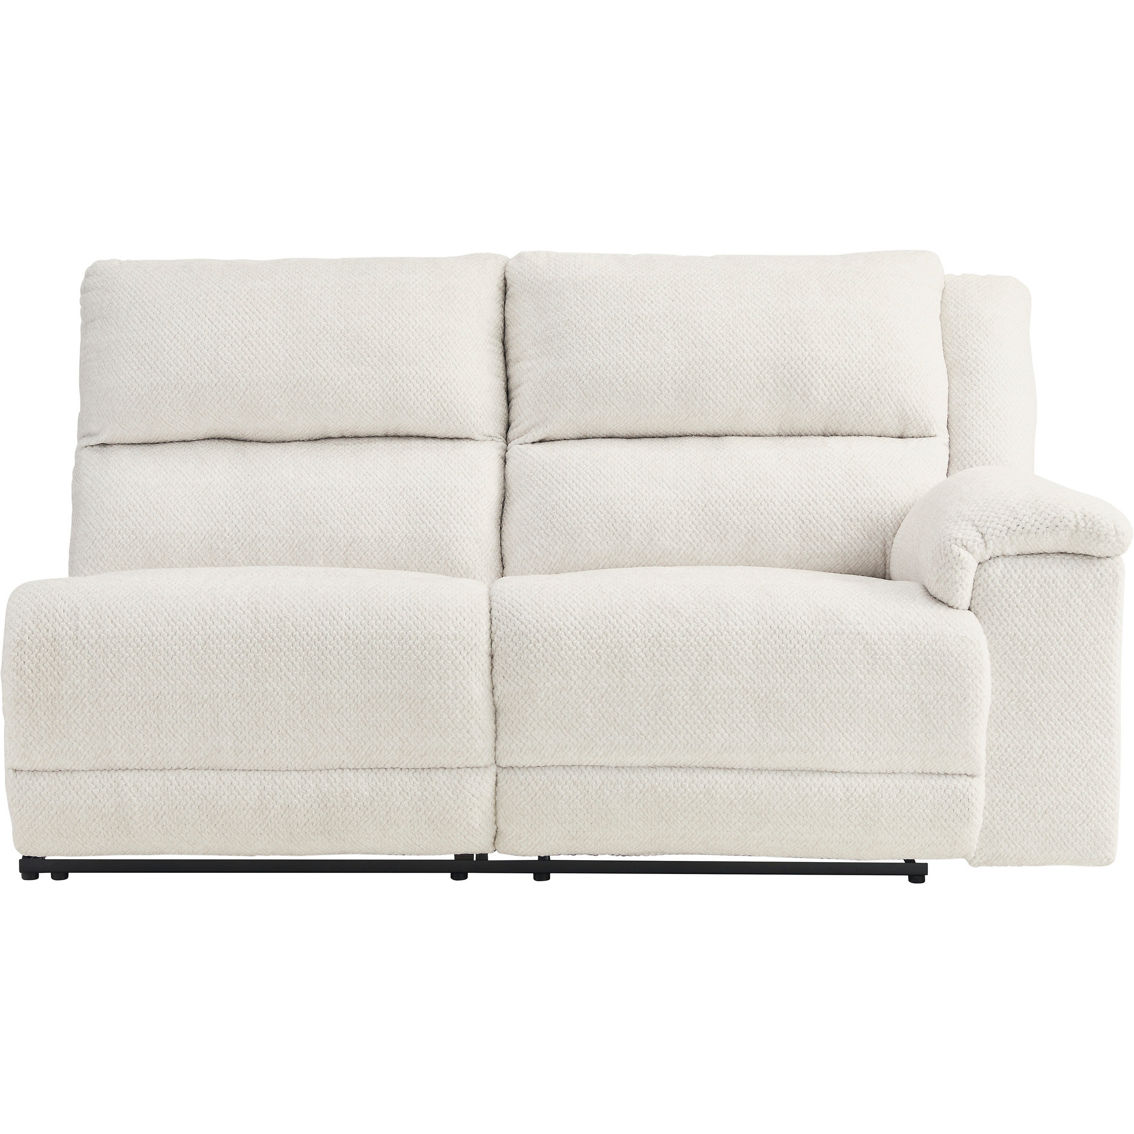 Signature Design by Ashley Keensburg 3pc. Power Reclining Sectional - Image 3 of 6